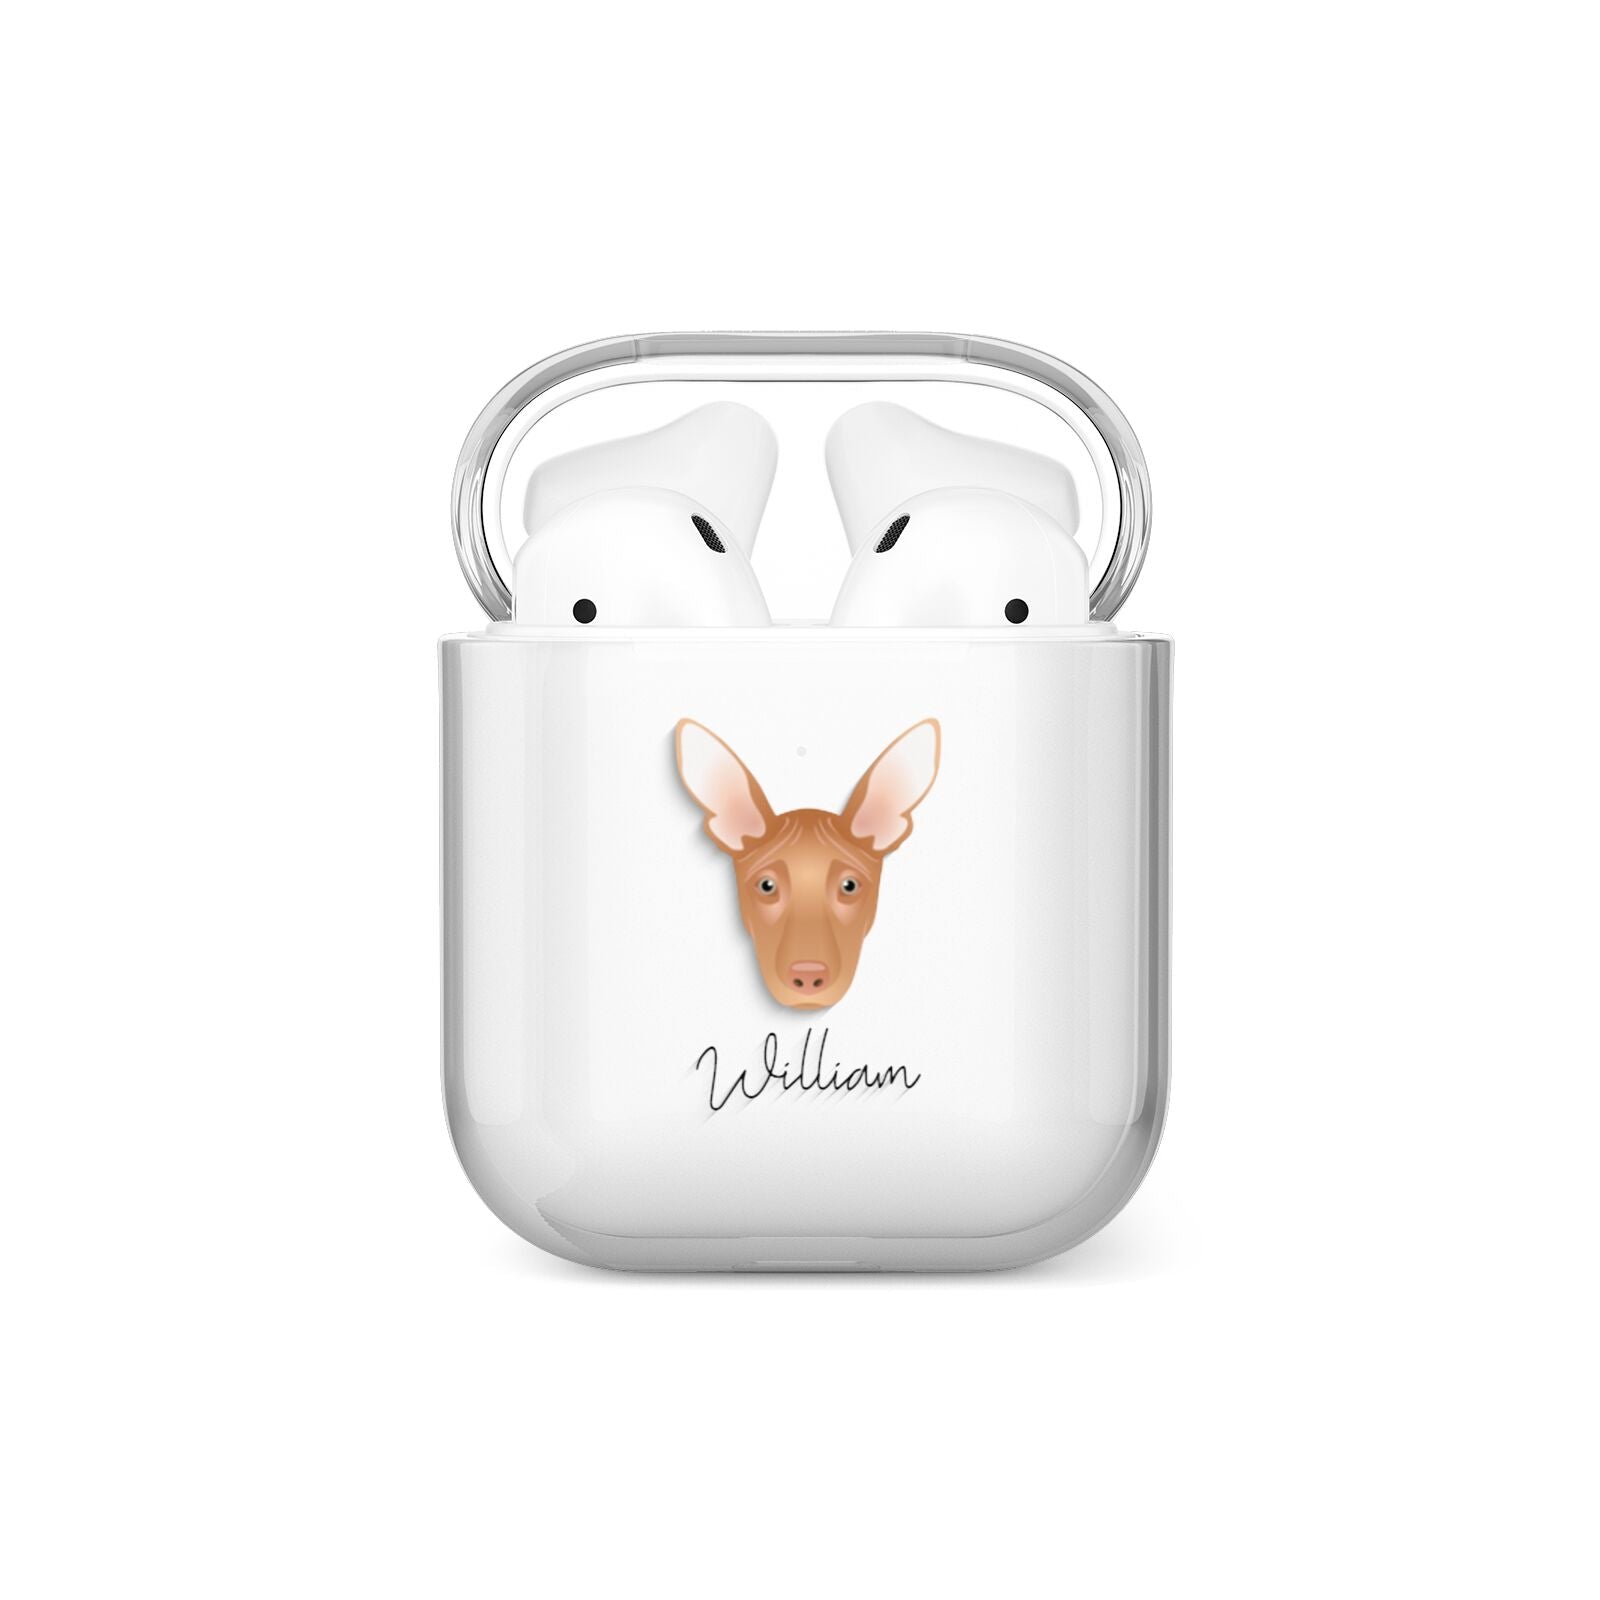 Pharaoh Hound Personalised AirPods Case